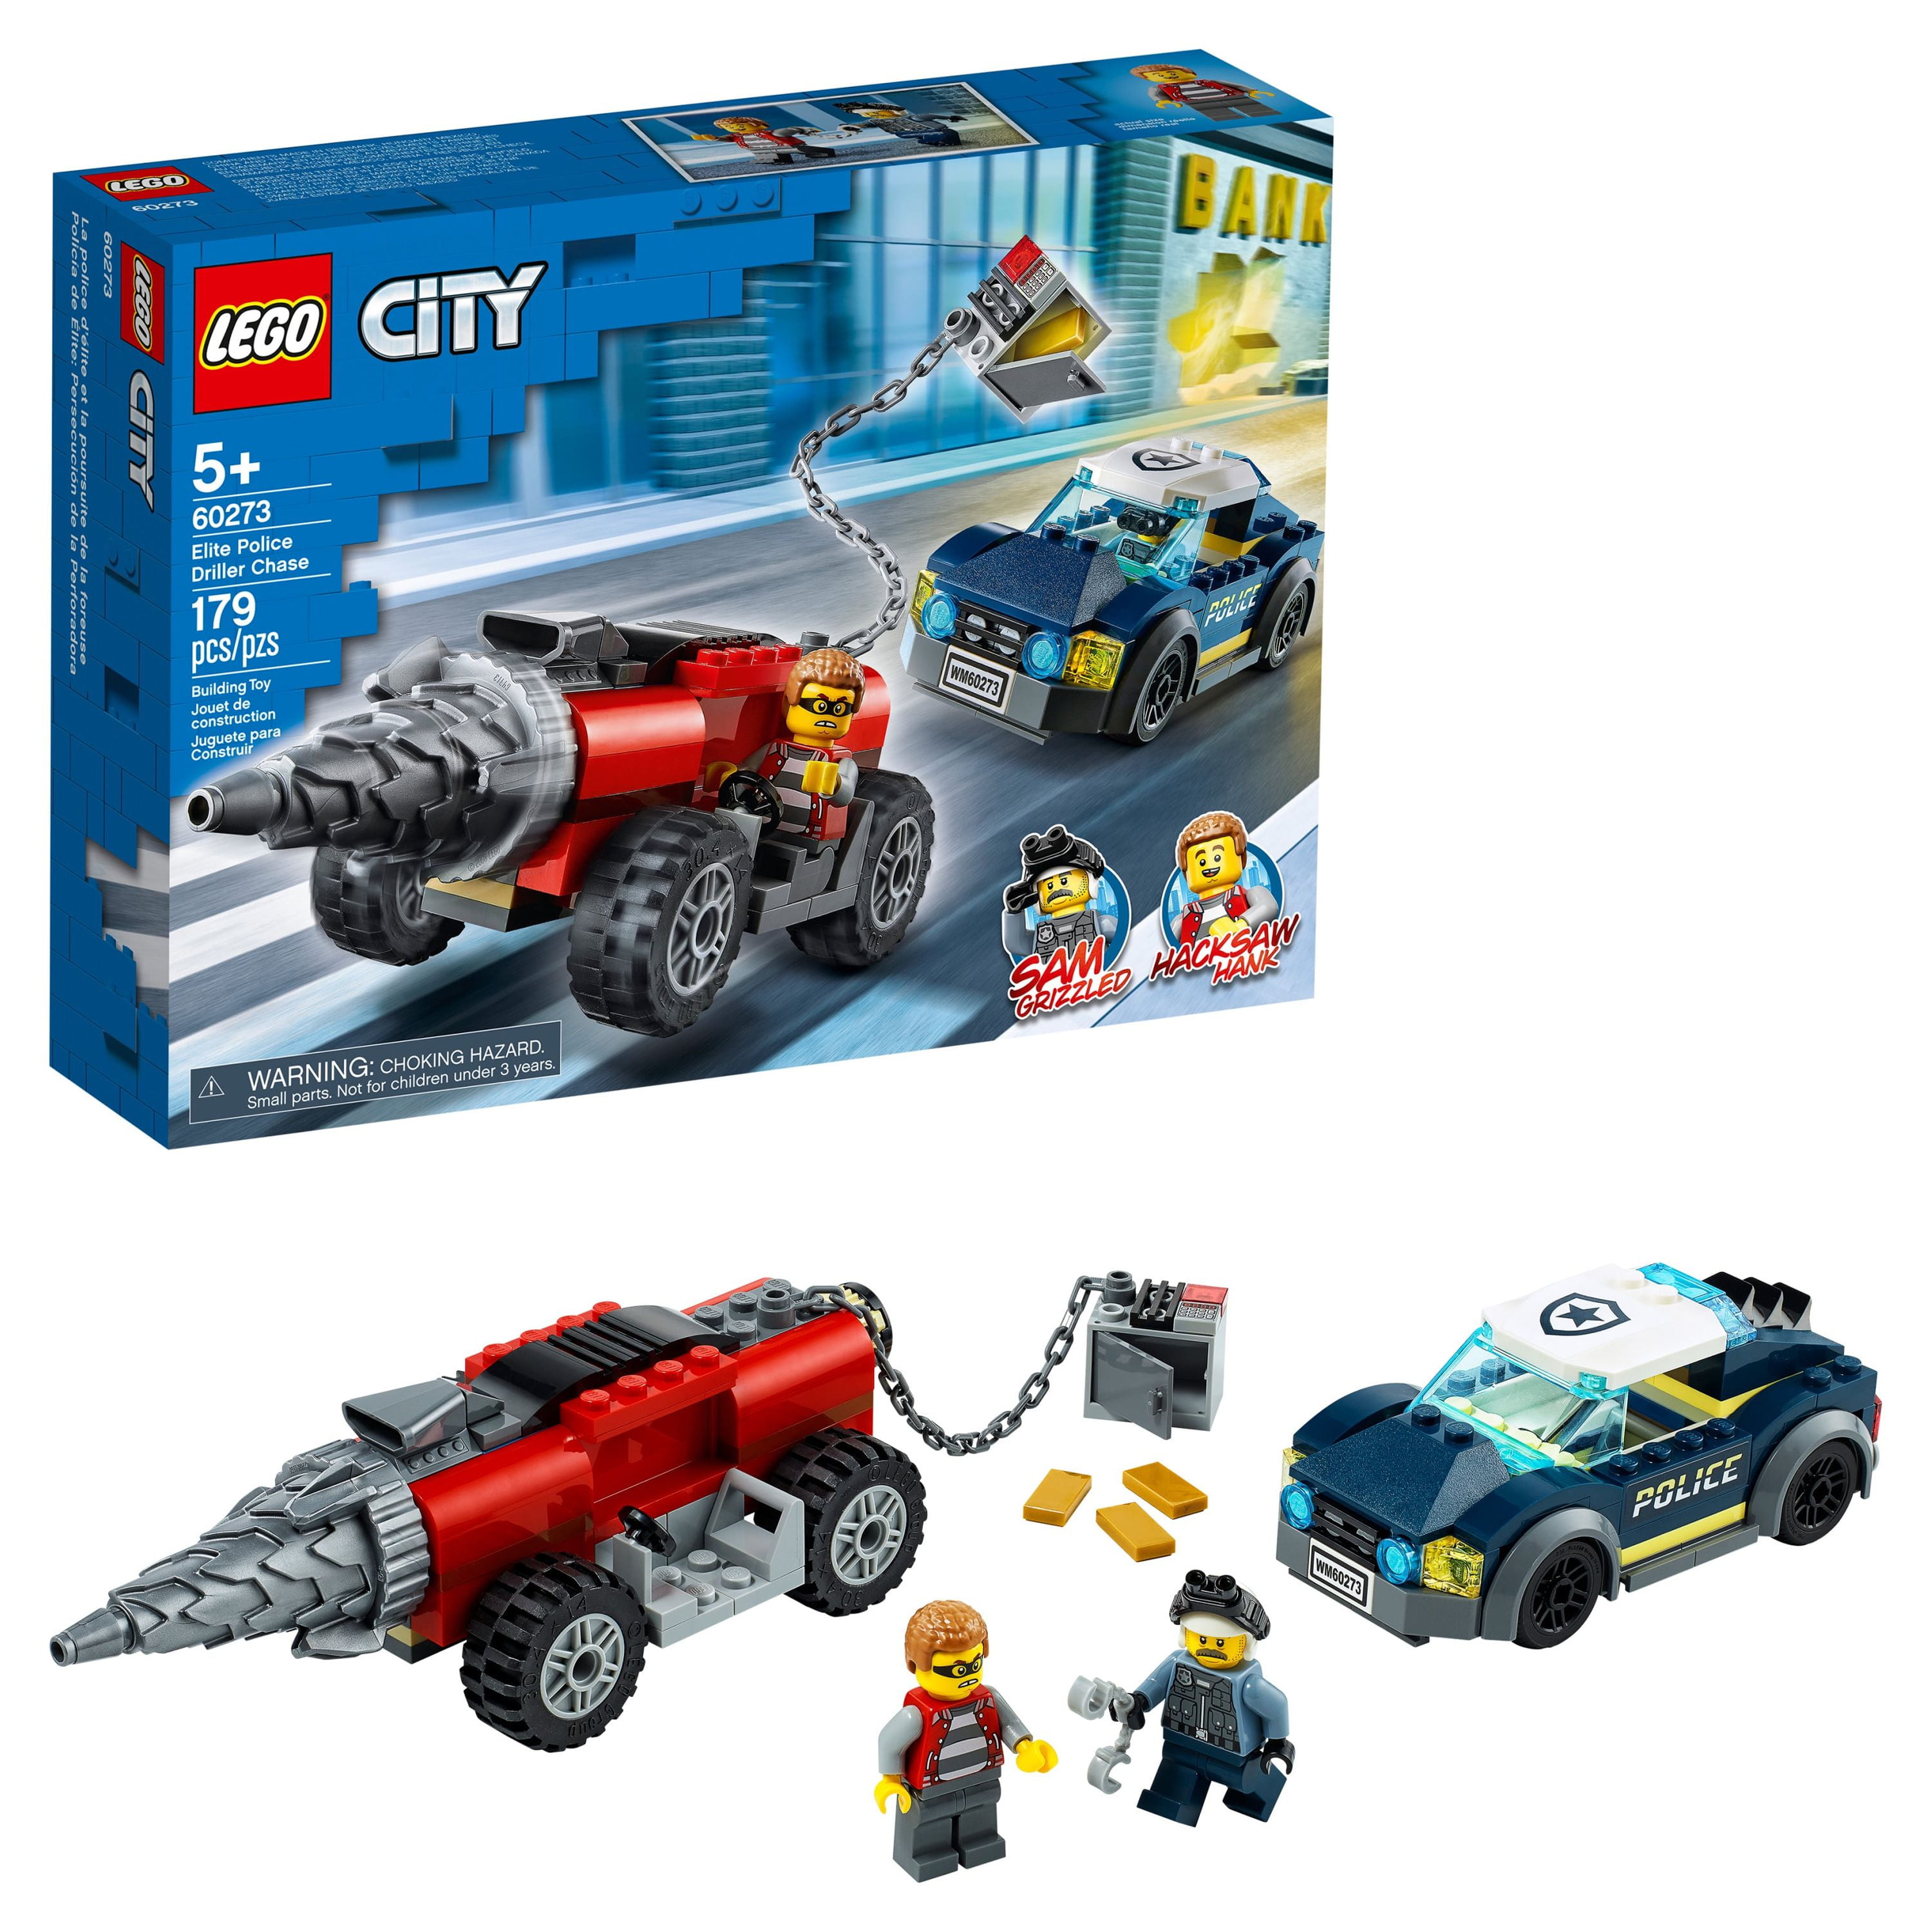 179-piece LEGO City Police Driller Chase Kid's Toy Set (60273) $20.57 + Free Shipping w/ Walmart+ or $35+